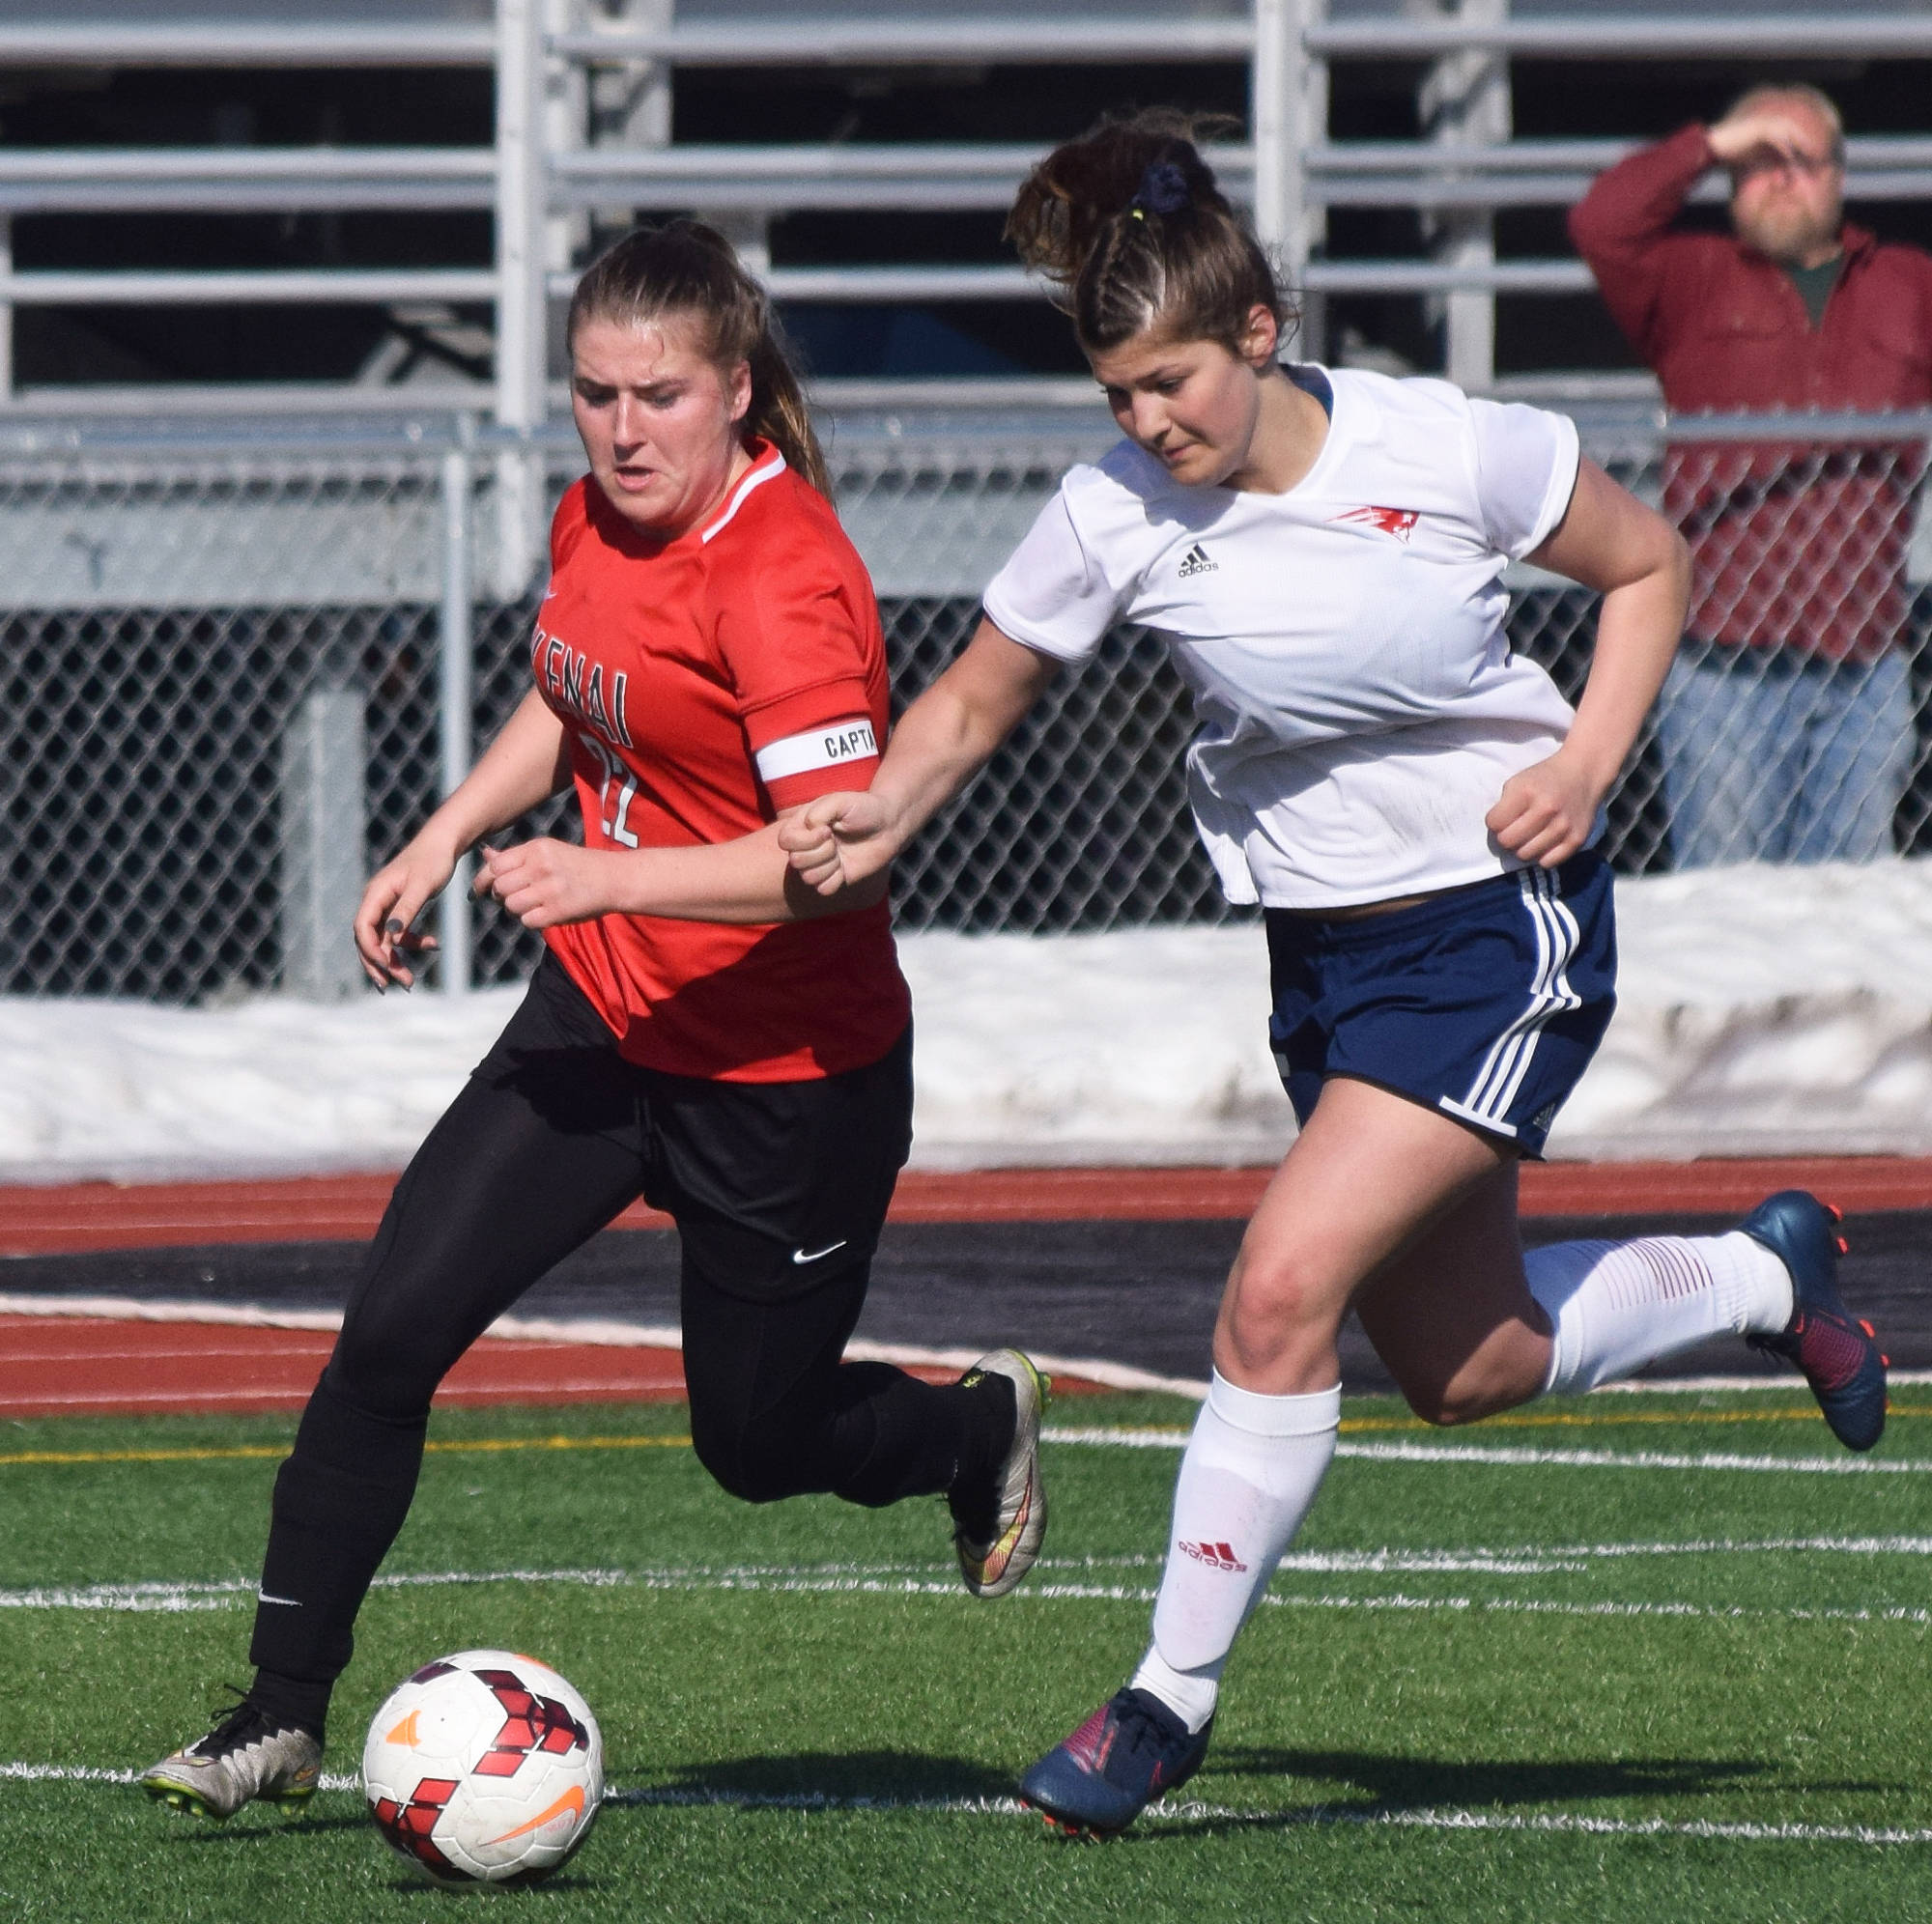 Kenai’s Olivia Brewer races to the ball against North Pole’s Maryn Long Saturday, April 13, 2019, in a nonconference game at Kenai Central High School. (Photo by Joey Klecka/Peninsula Clarion)